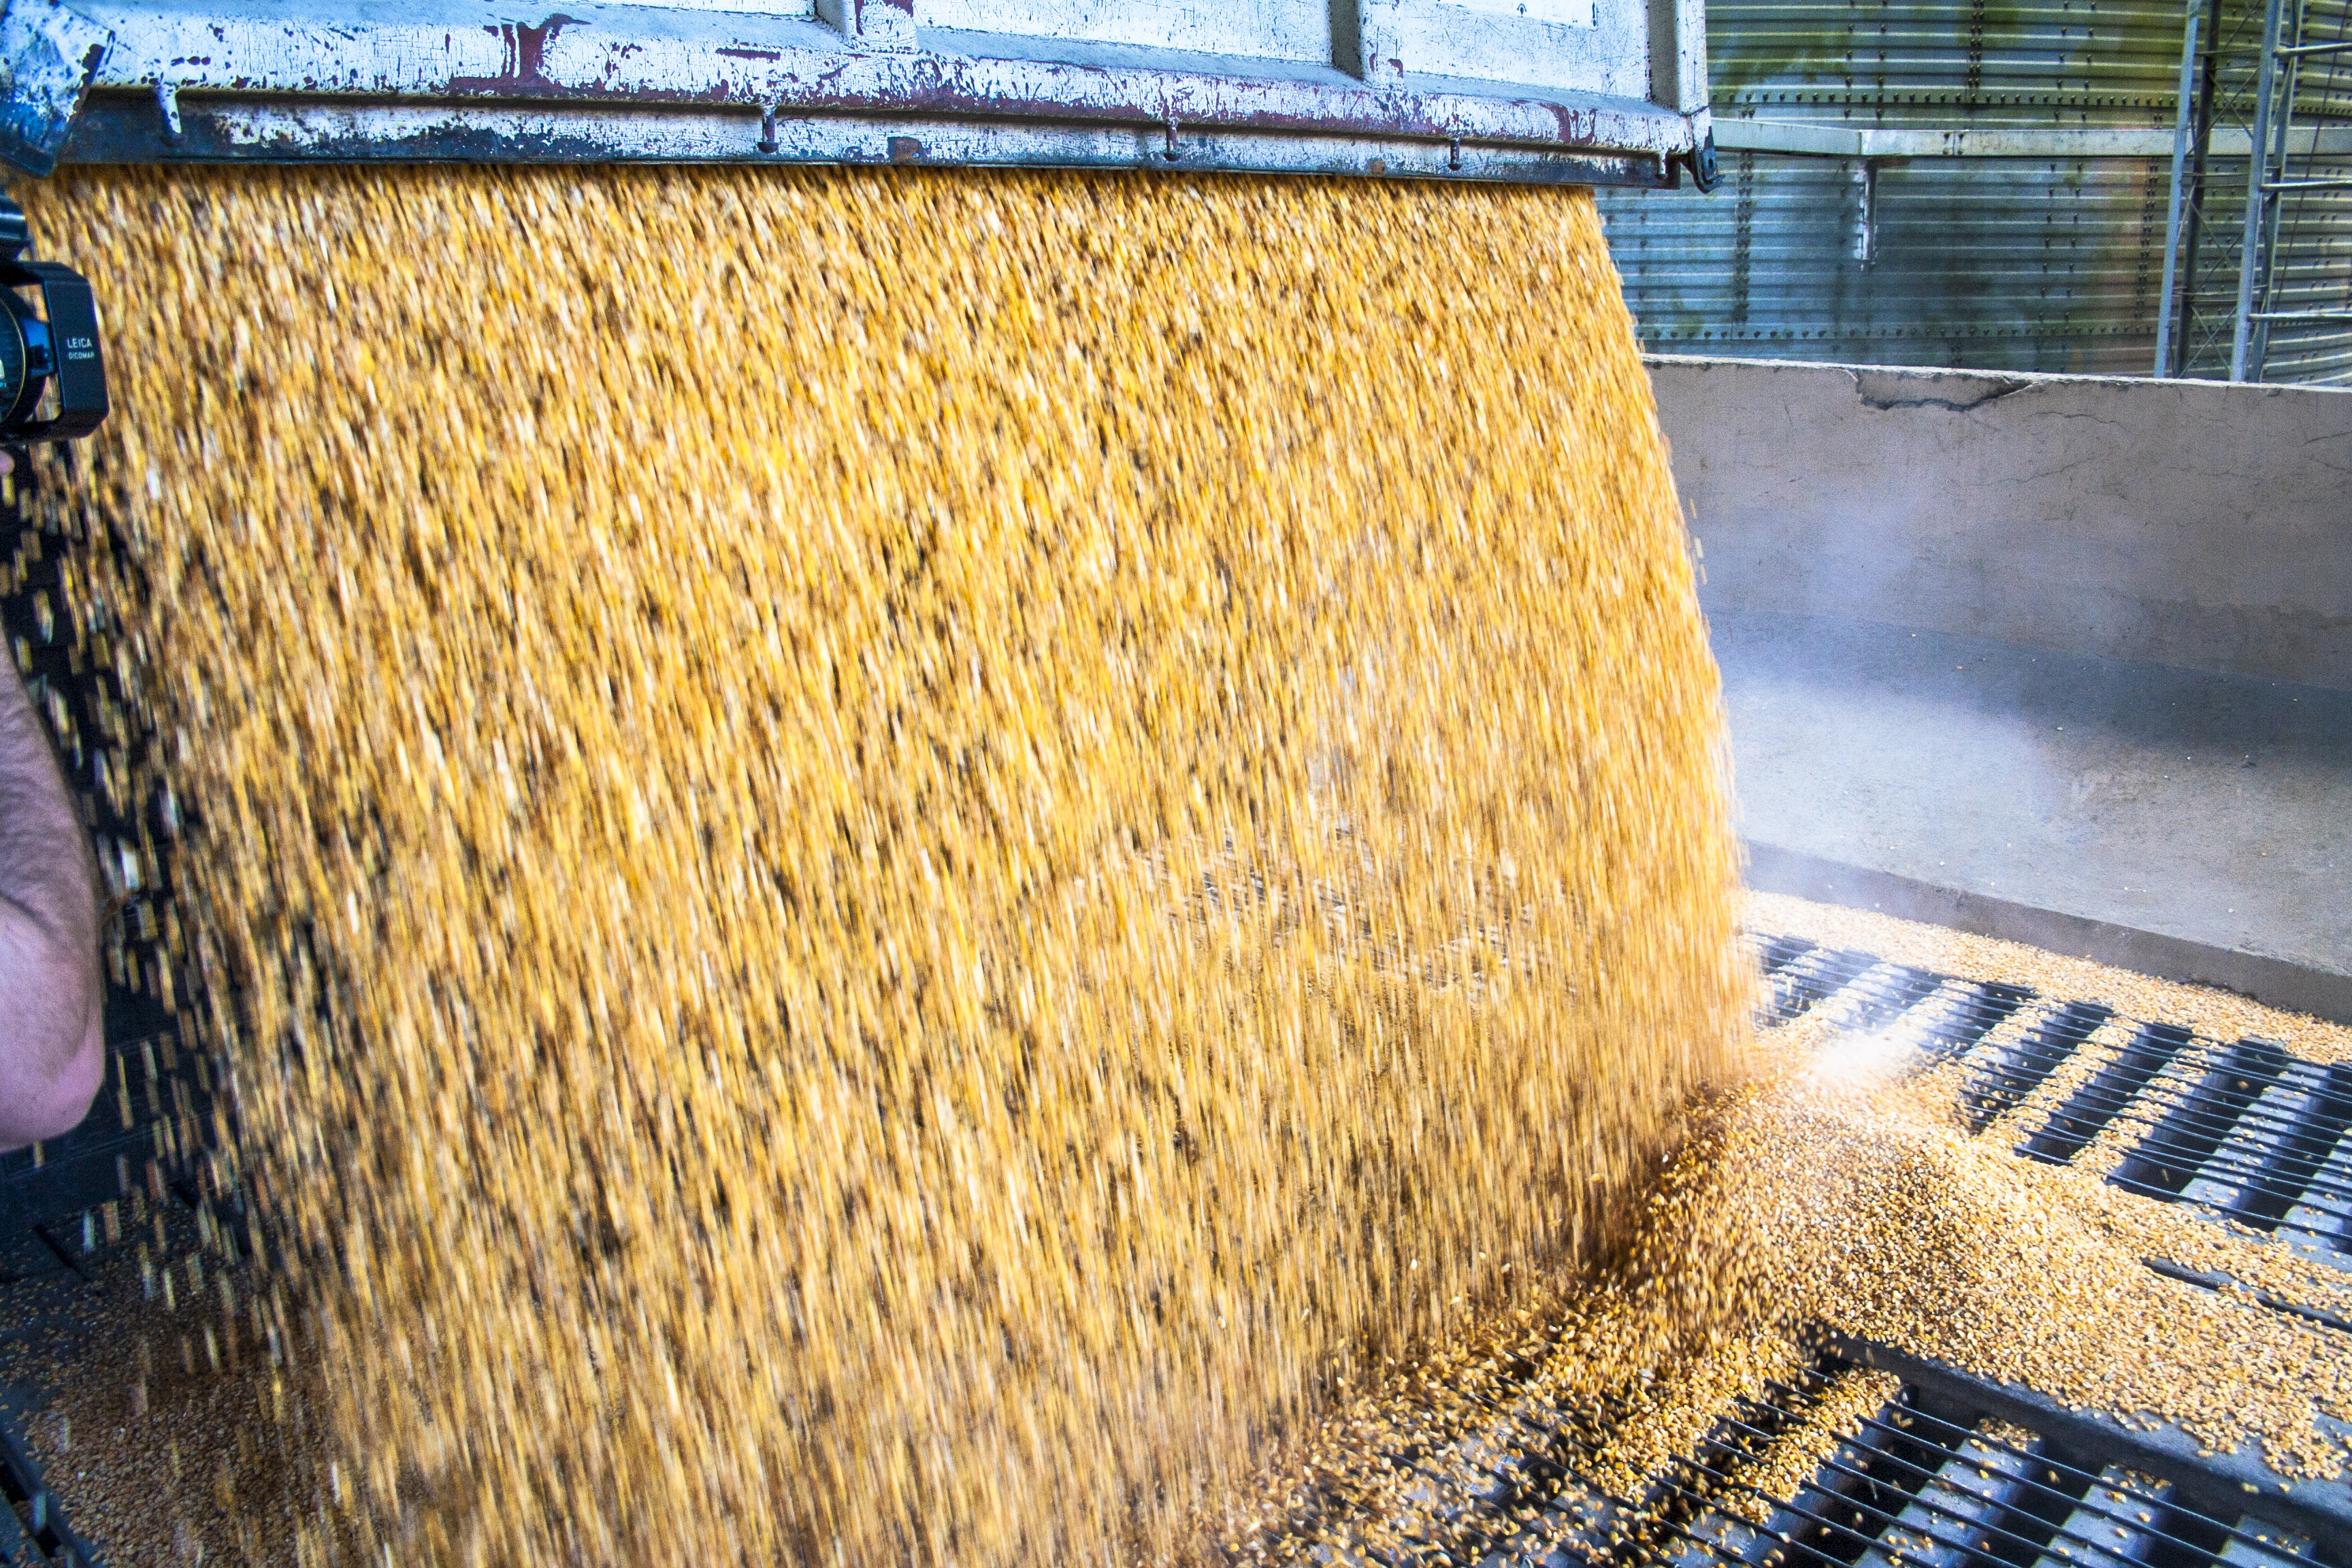 feed grains being sorted on a conveyer belt